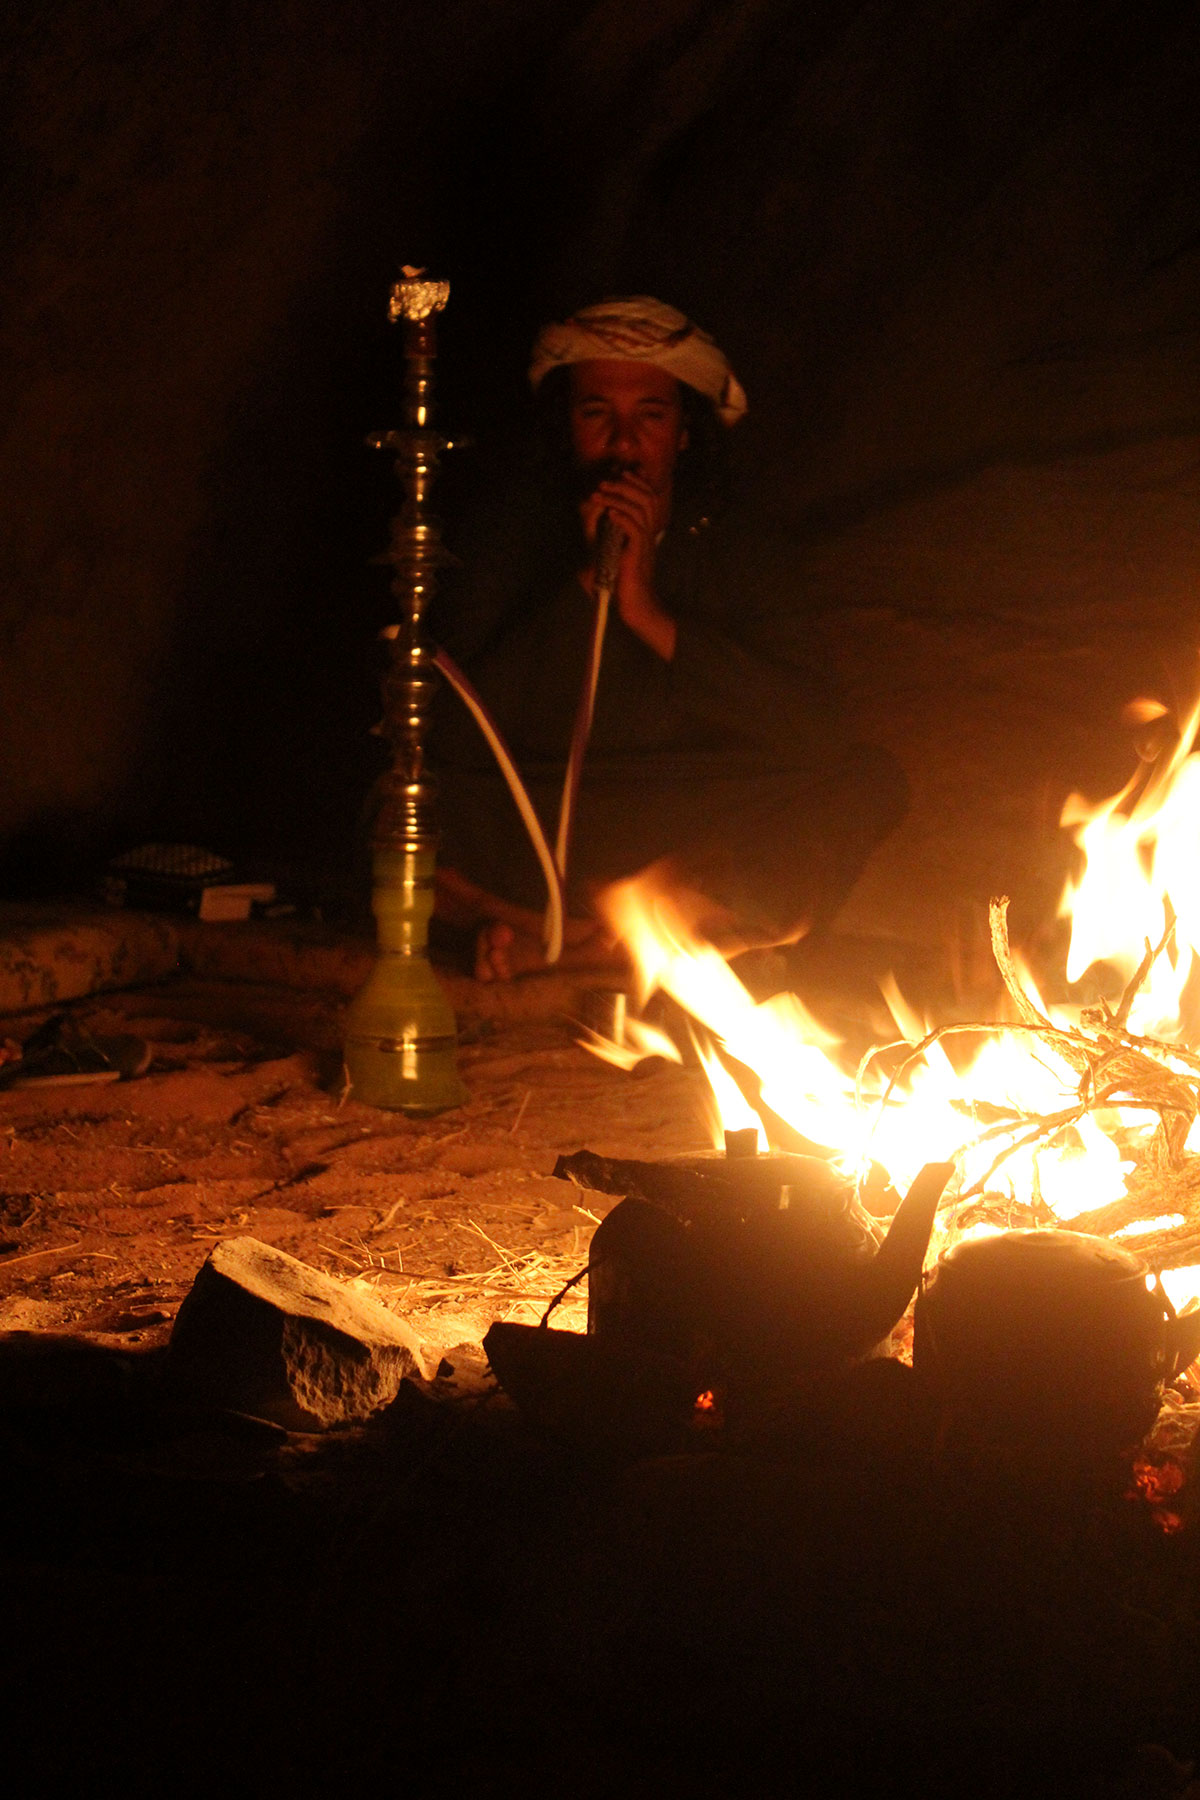 A night with the nomads in Jordan